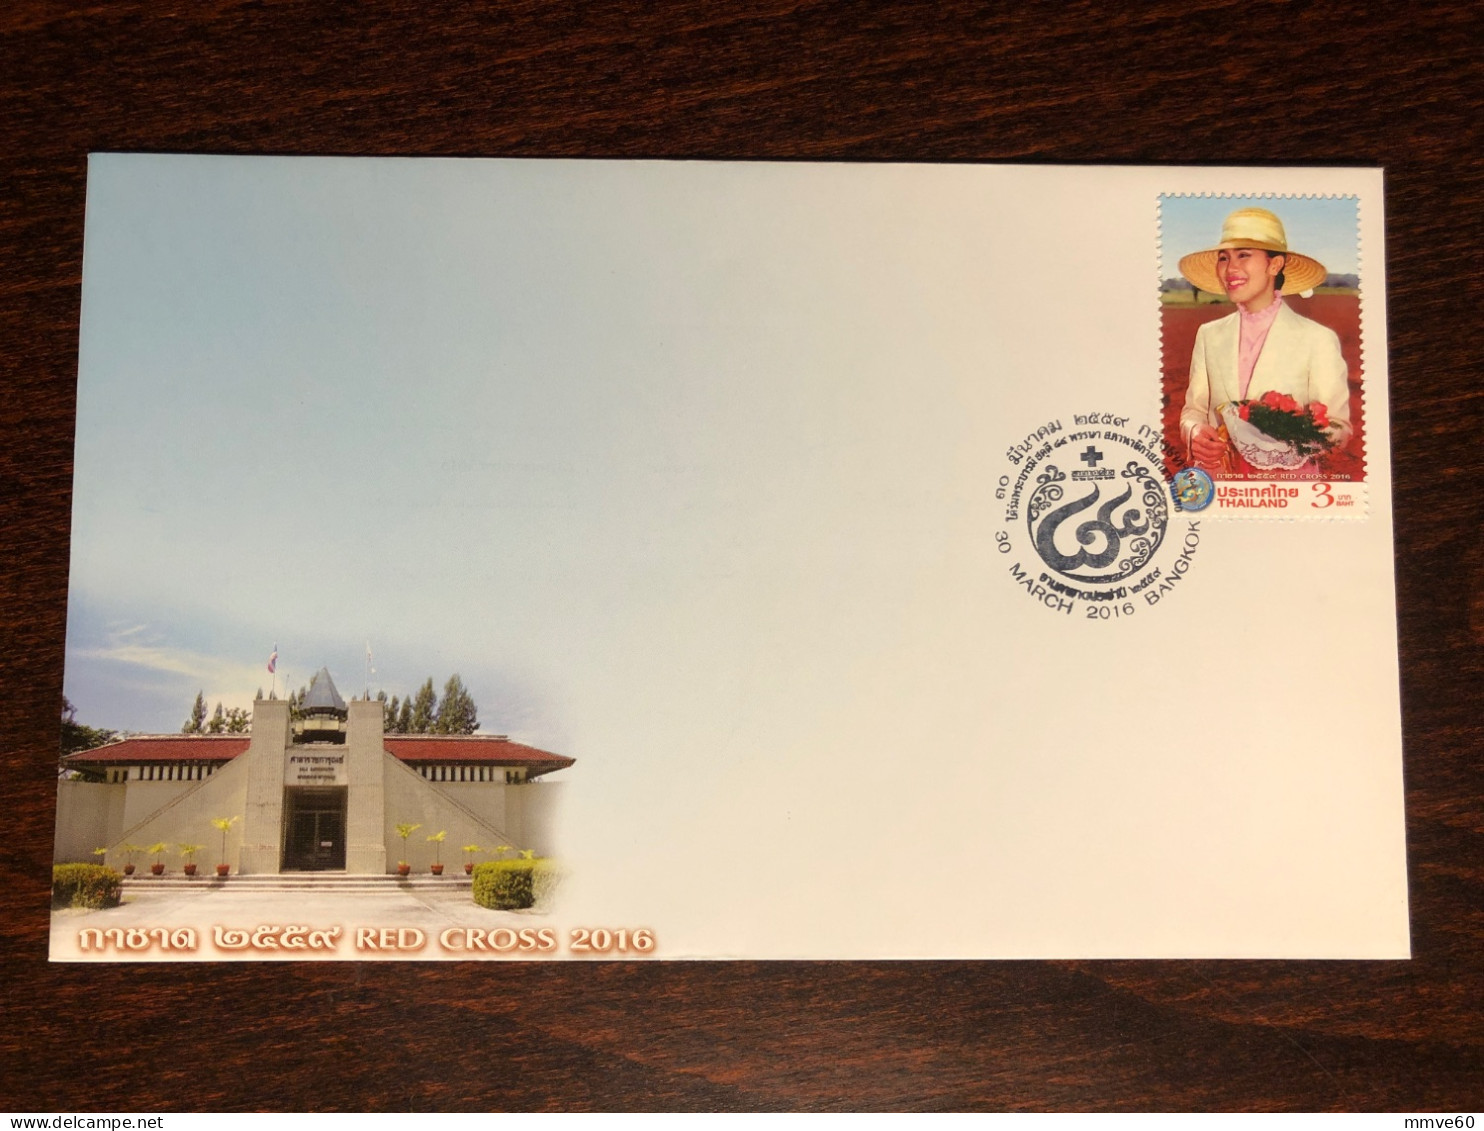 THAILAND FDC COVER 2016 YEAR RED CROSS HEALTH MEDICINE STAMPS - Tailandia